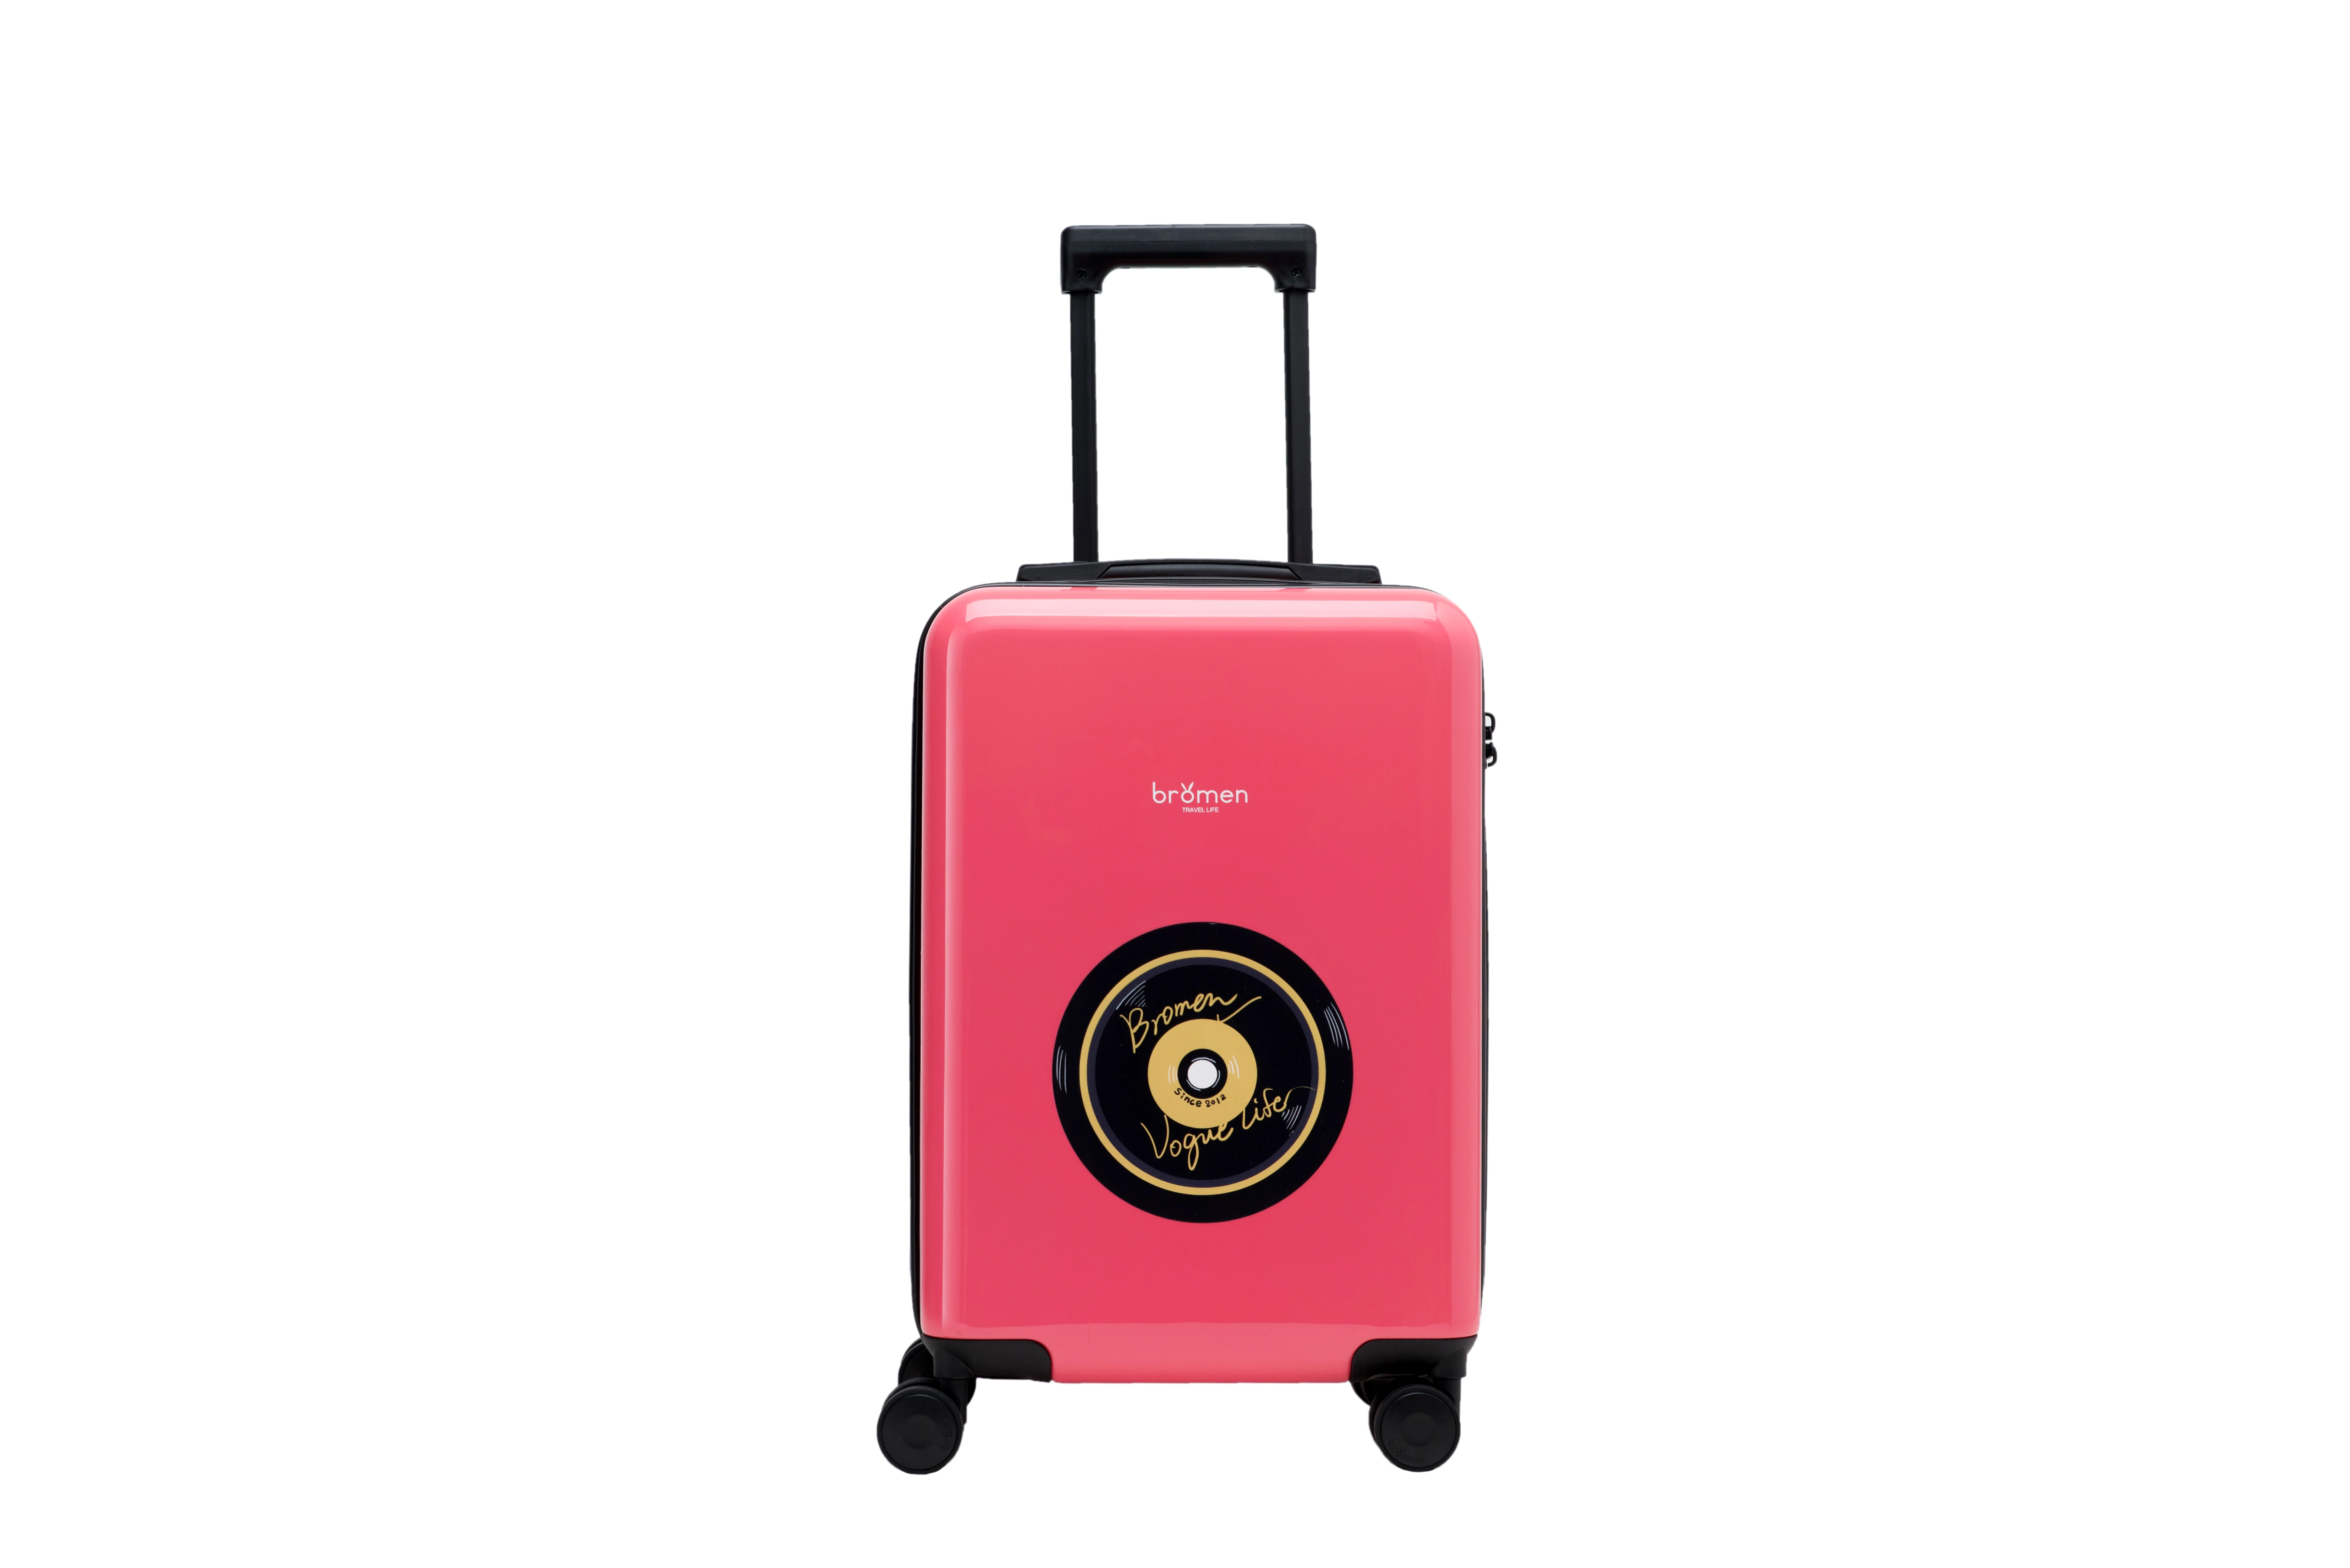 bromen ONEBOX PC luggage high quality fashionable musical series record trolley case